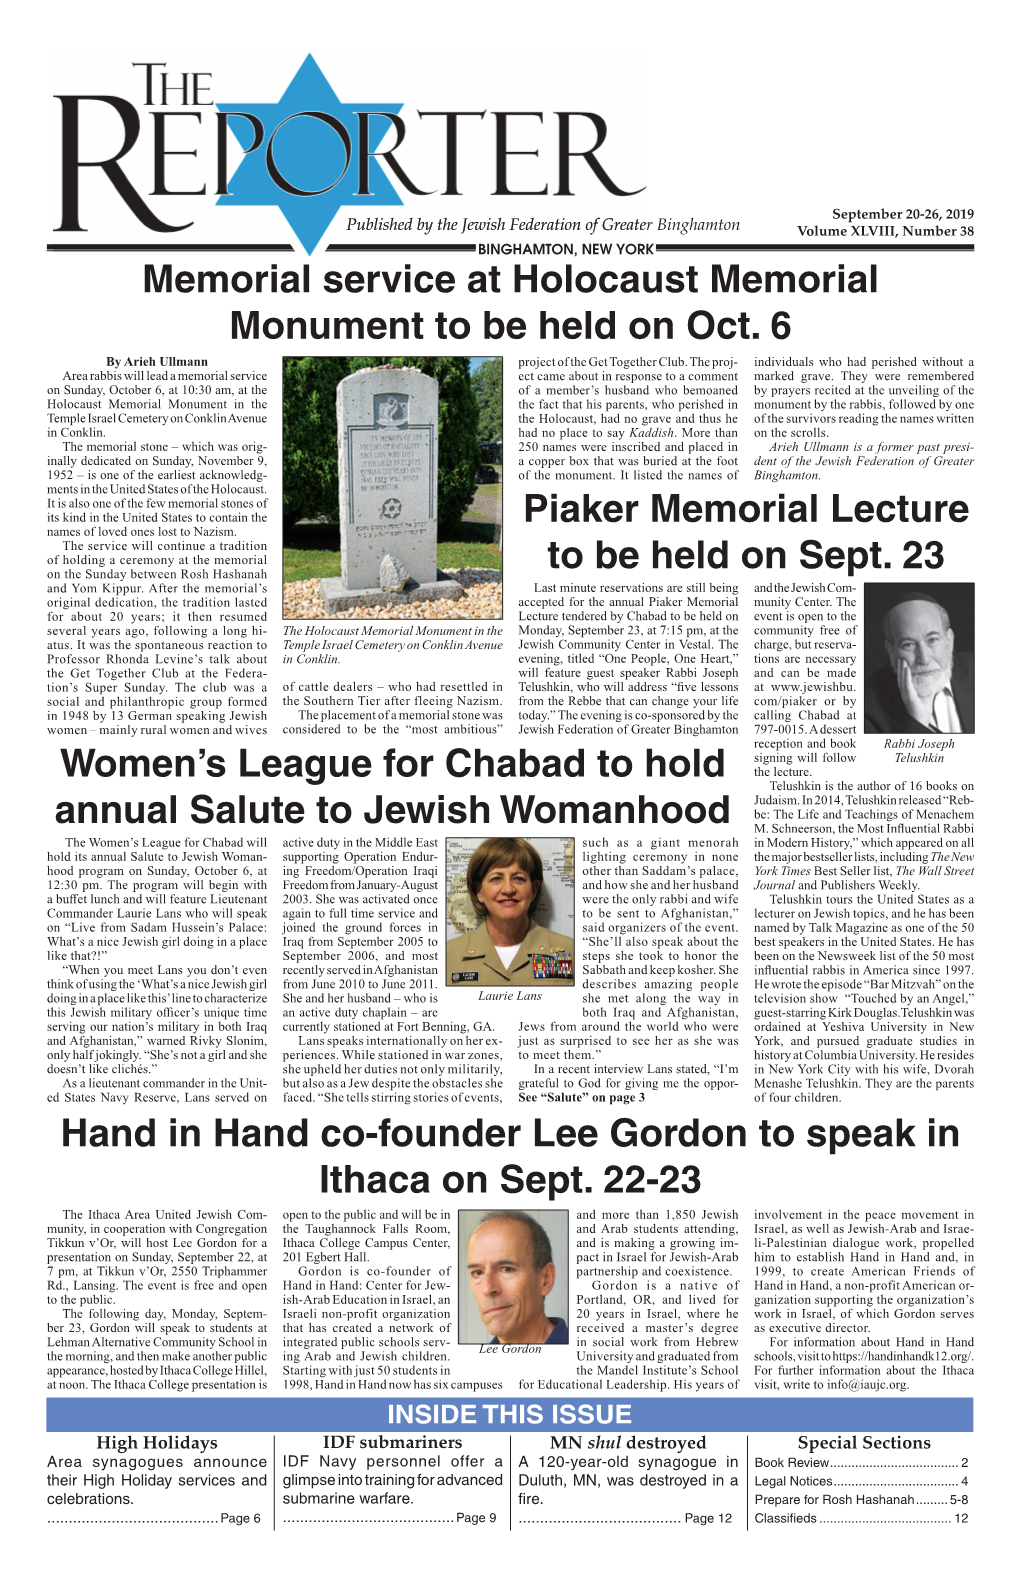 Hand in Hand Co-Founder Lee Gordon to Speak in Ithaca on Sept. 22-23 Memorial Service at Holocaust Memorial Monument to Be Held